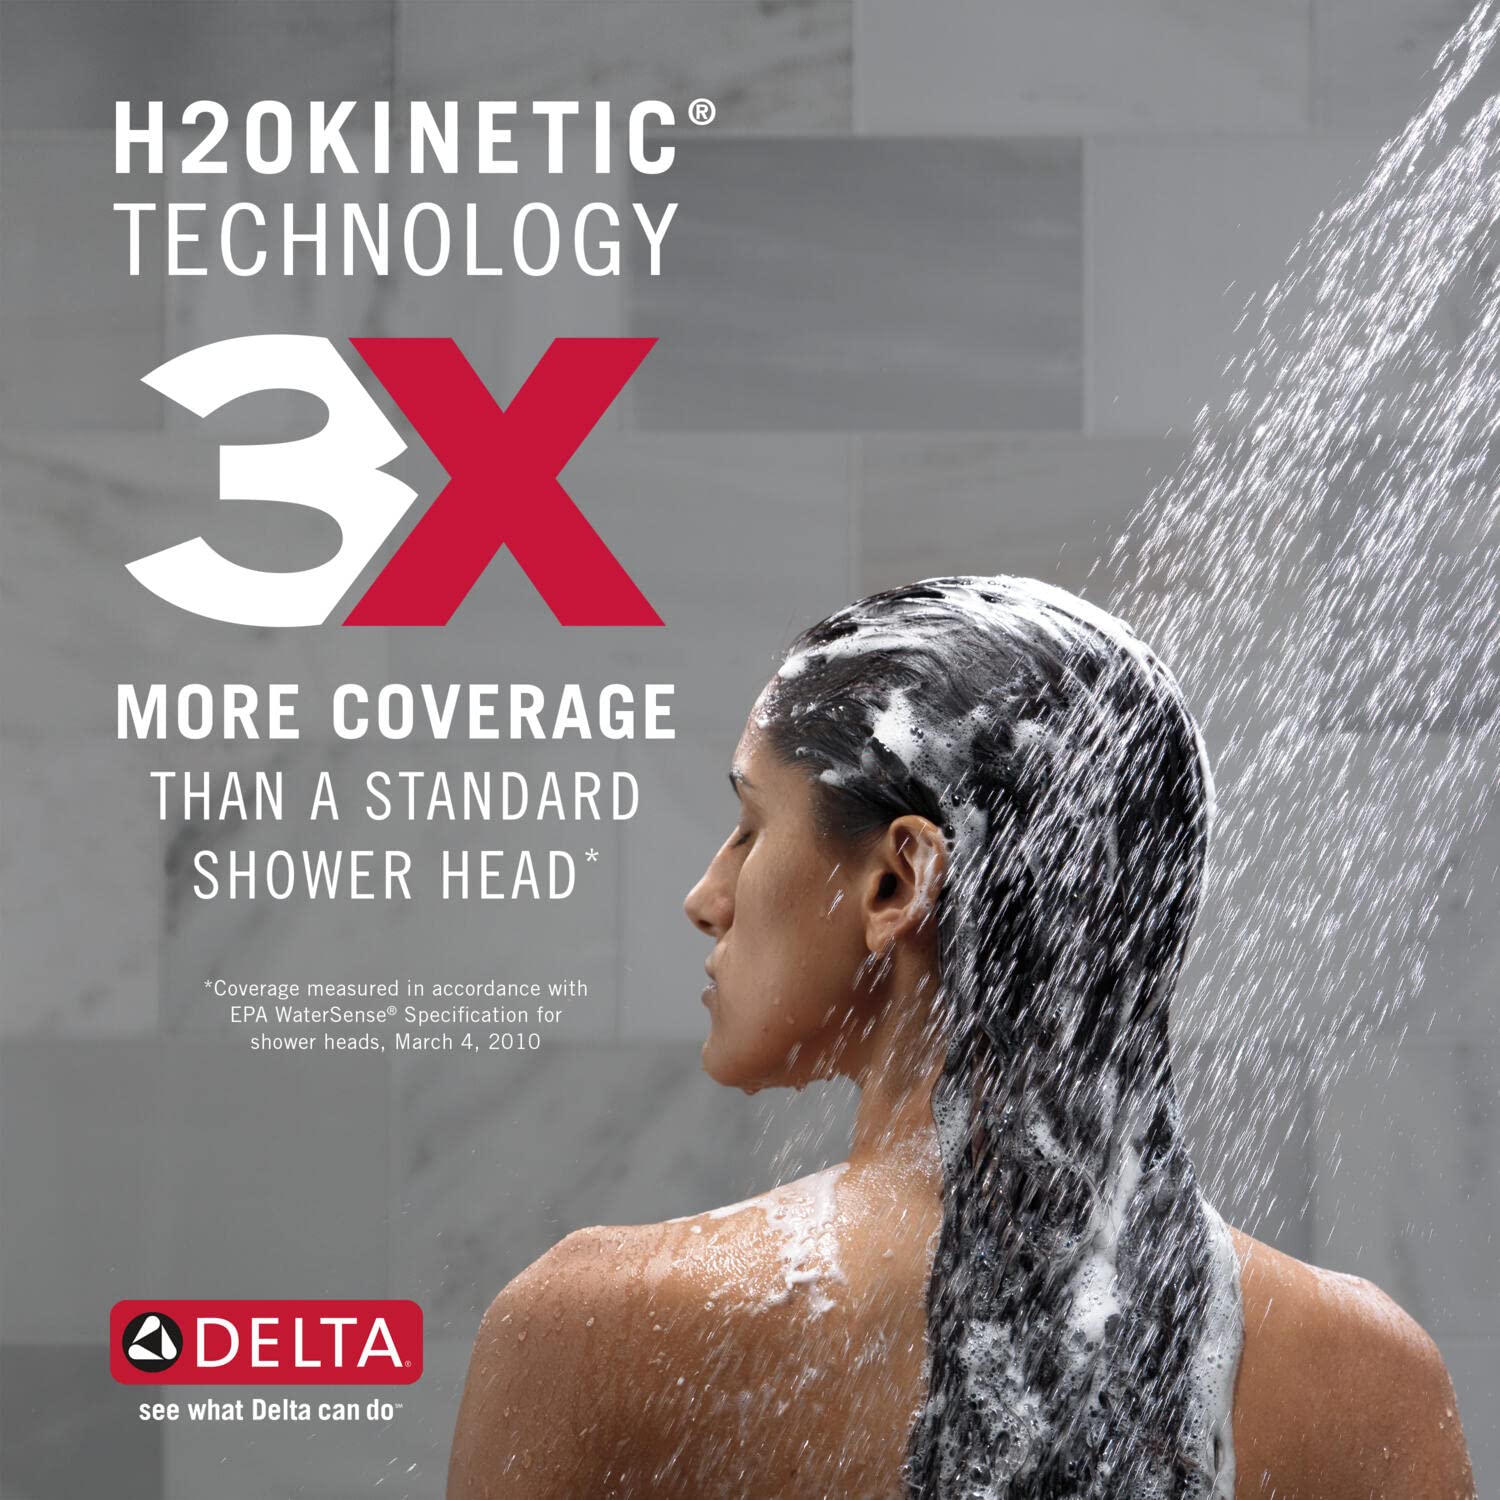 Delta Faucet 4-Spray In2ition Dual Shower Head with Handheld Spray, Oil Rubbed Bronze Shower Head with Hose, Showerheads & Handheld Showers, Handheld Shower Heads, Venetian Bronze 58499-RB